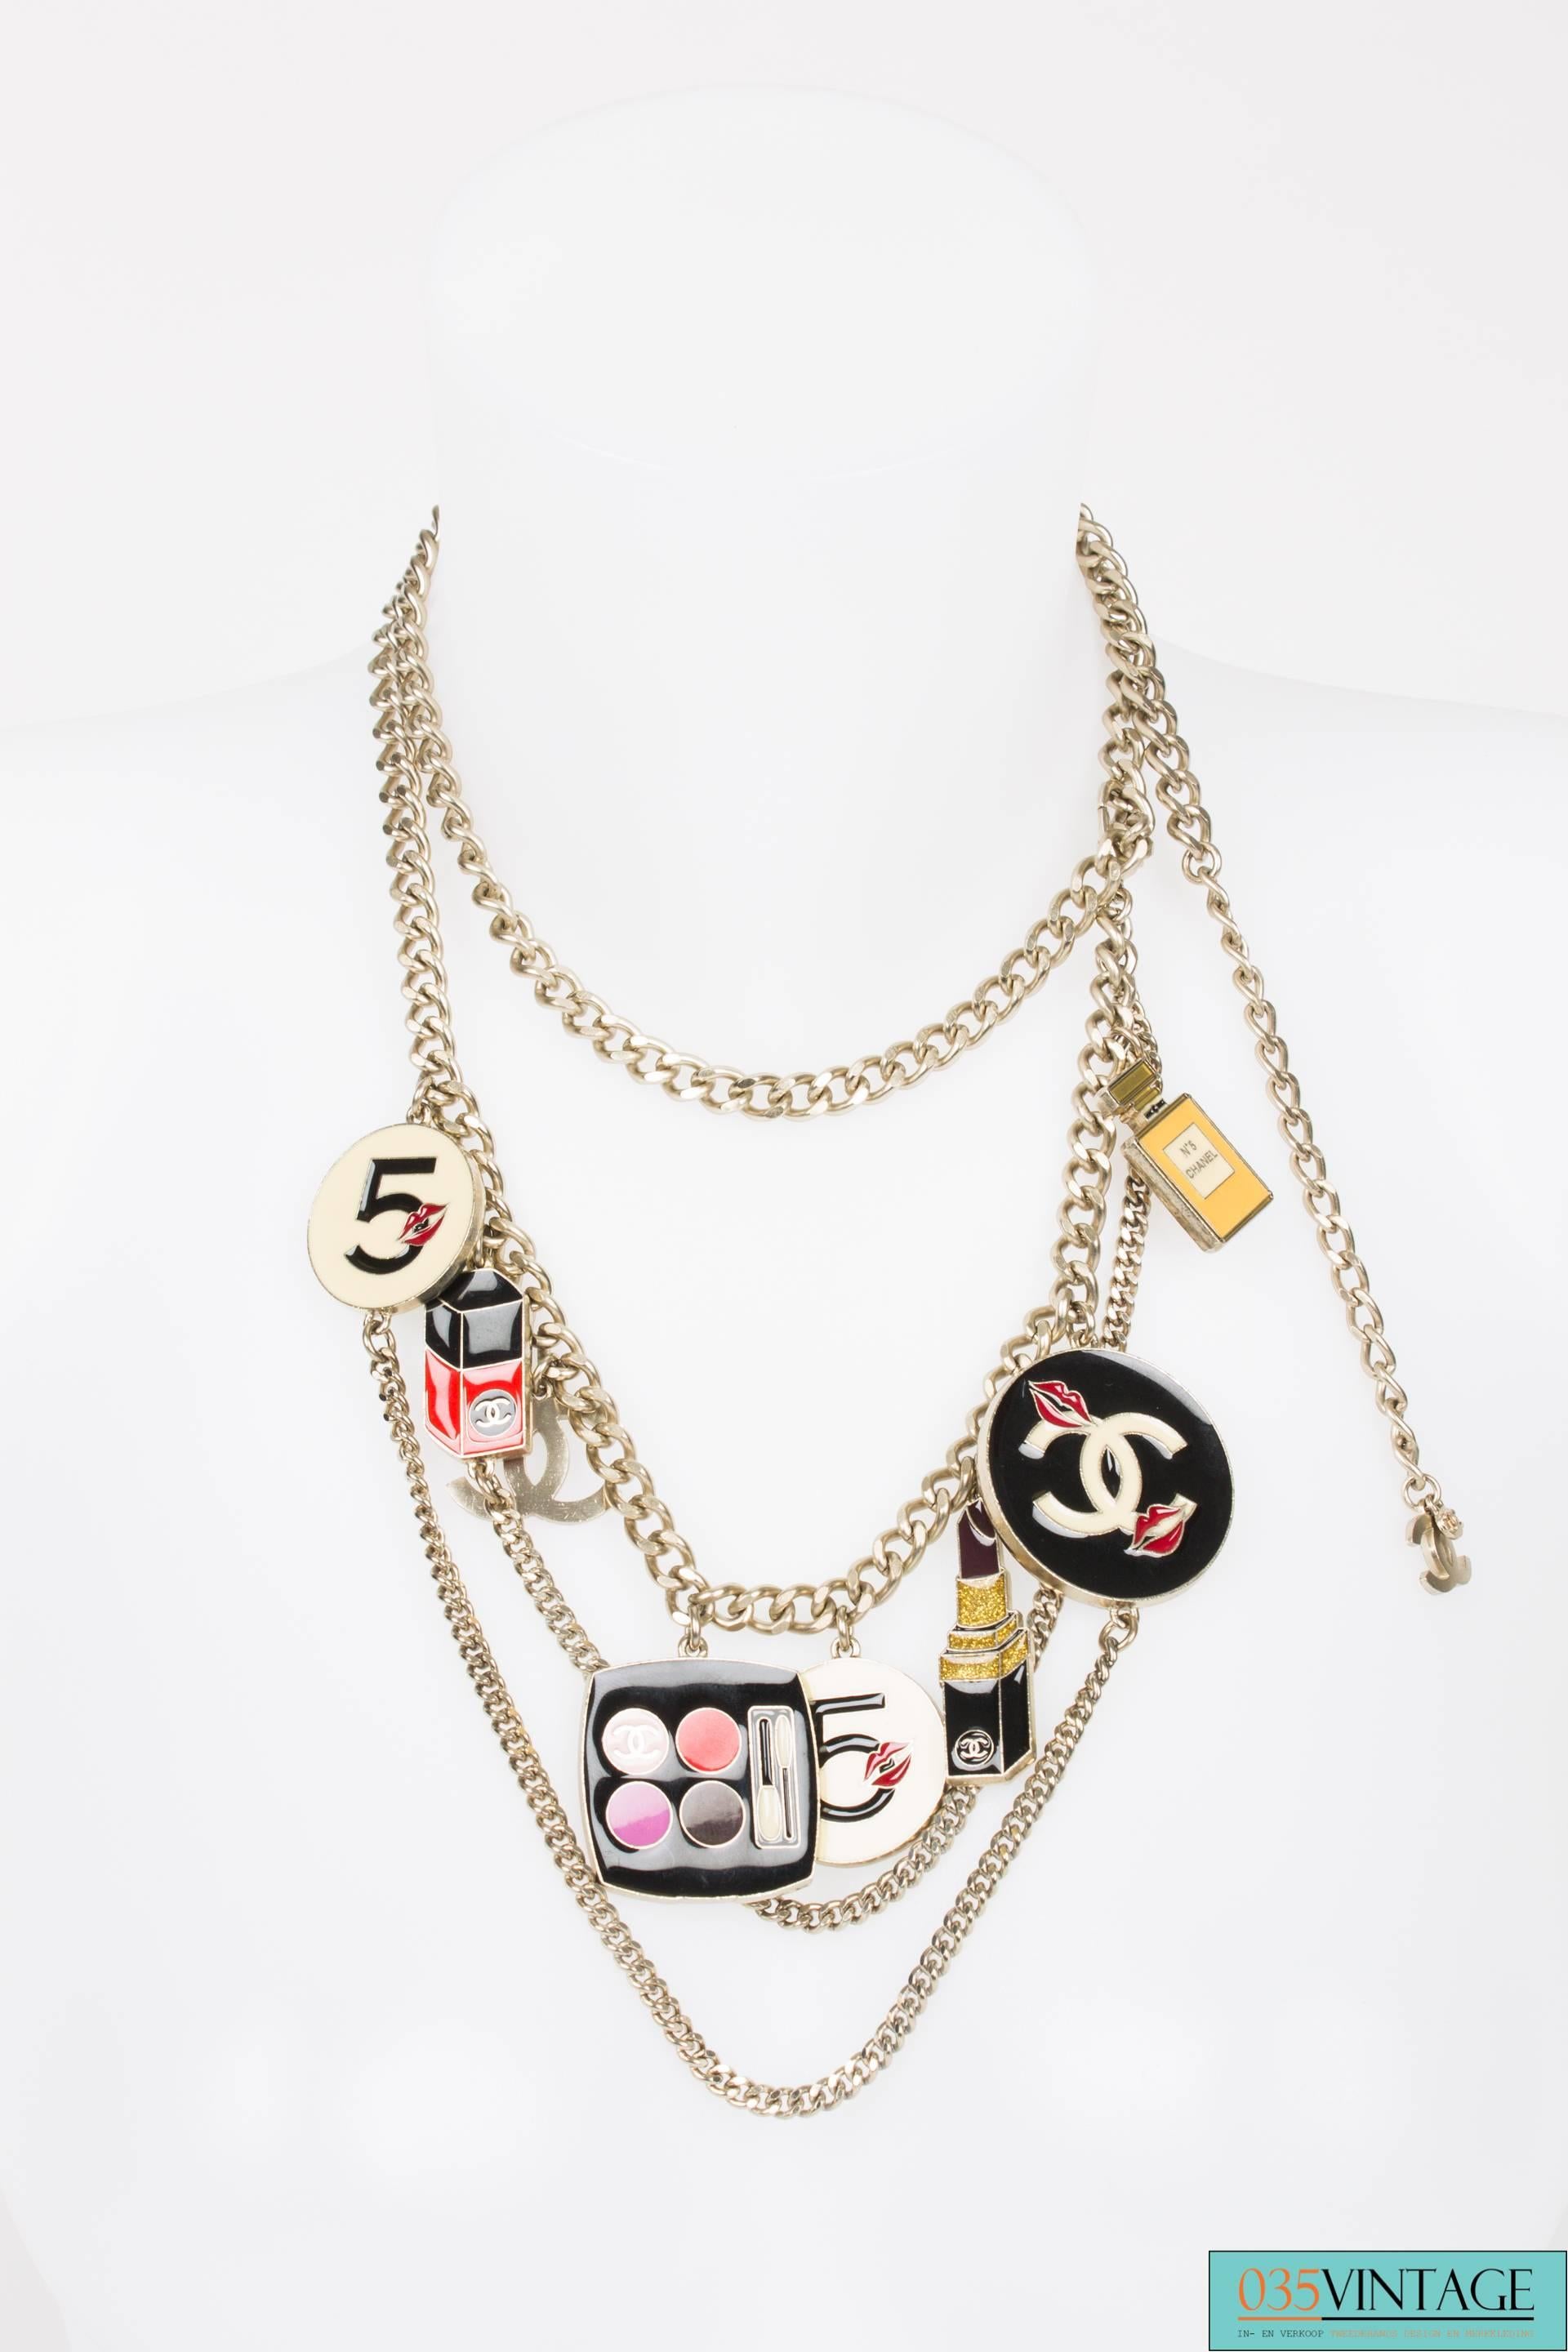 Oh la la! This fancy chain belt is one of our favorites!

The silver chain holds large enamel charms and matte silver interlocking CC's. Three large round charms; a black one with white CC-logo and two lipstick kisses and two white ones with a